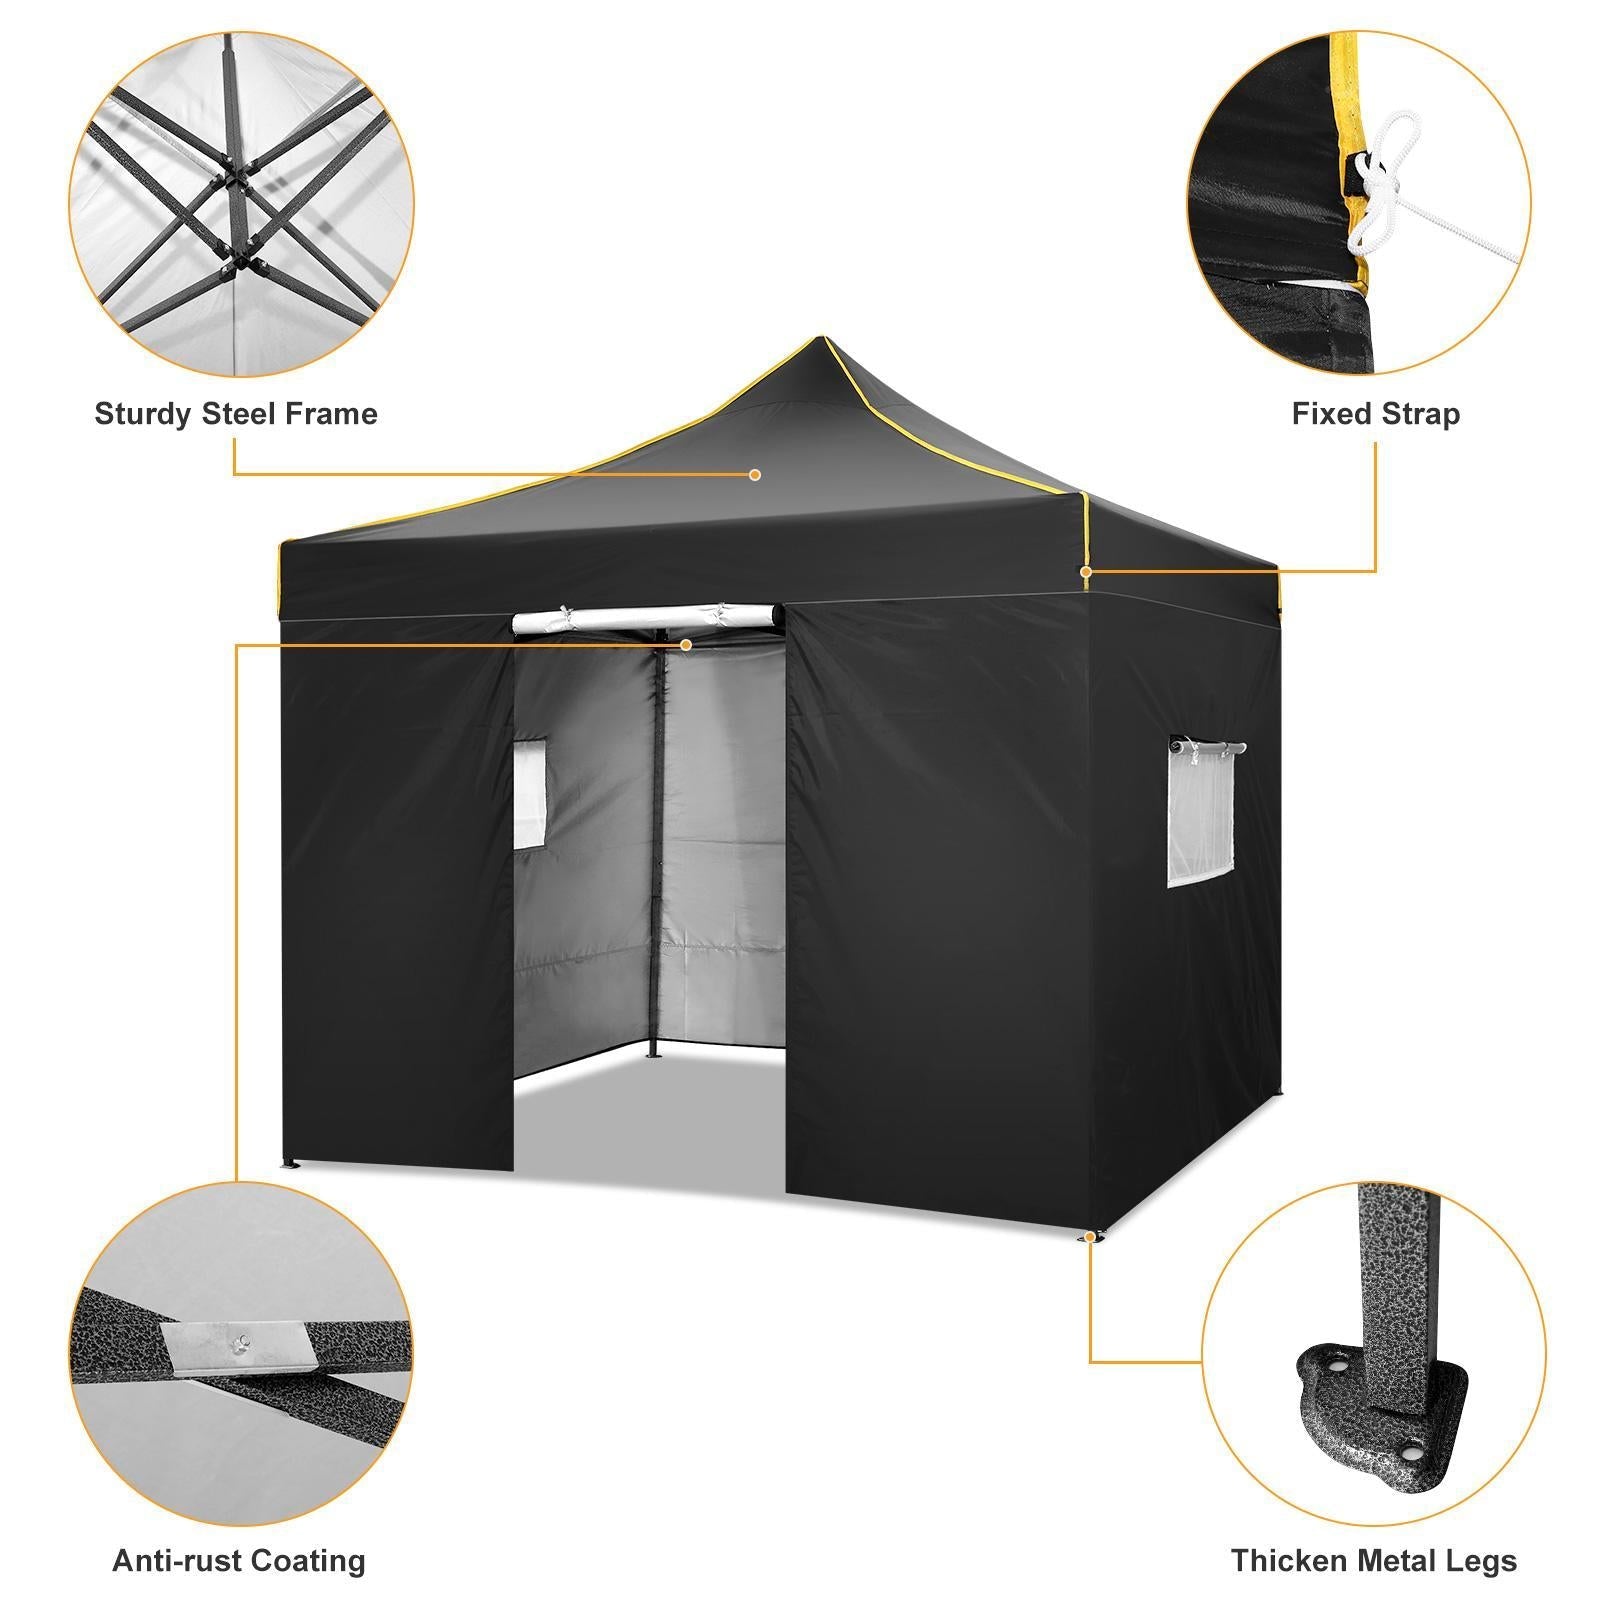 Likein 10x10Ft Pop Up Canopy Tent, Outdoor Camping Canopy with 4 Removable Sidewalls, Festival Tailgate Event Craft Show Instant Shelter with Carry Bag - Warehouse Clearance Black